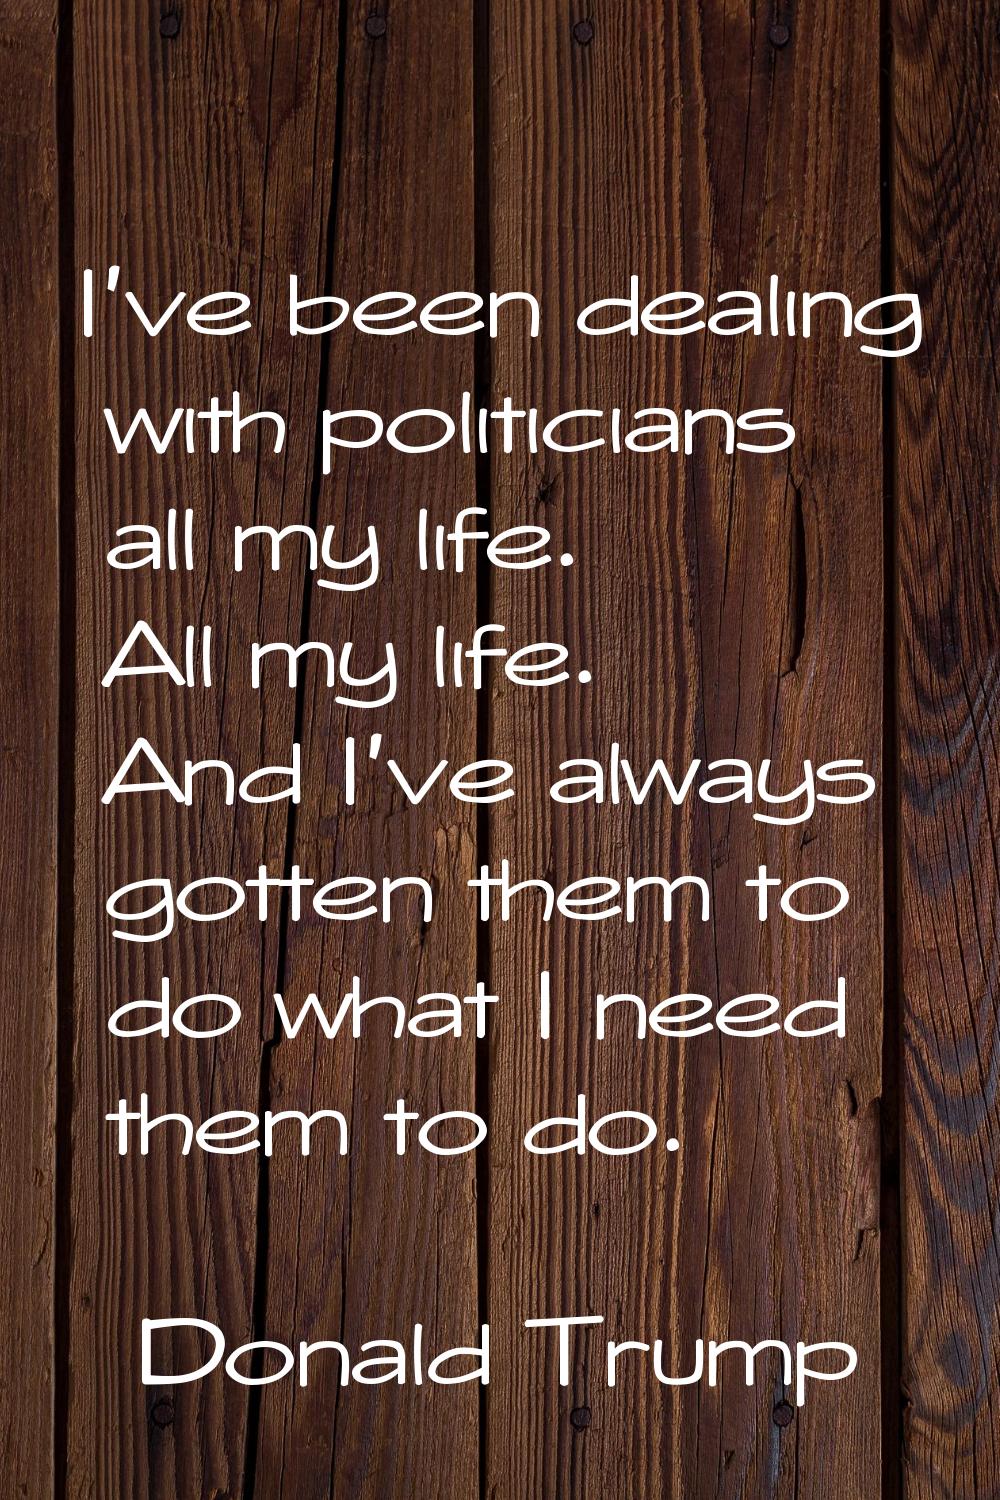 I've been dealing with politicians all my life. All my life. And I've always gotten them to do what